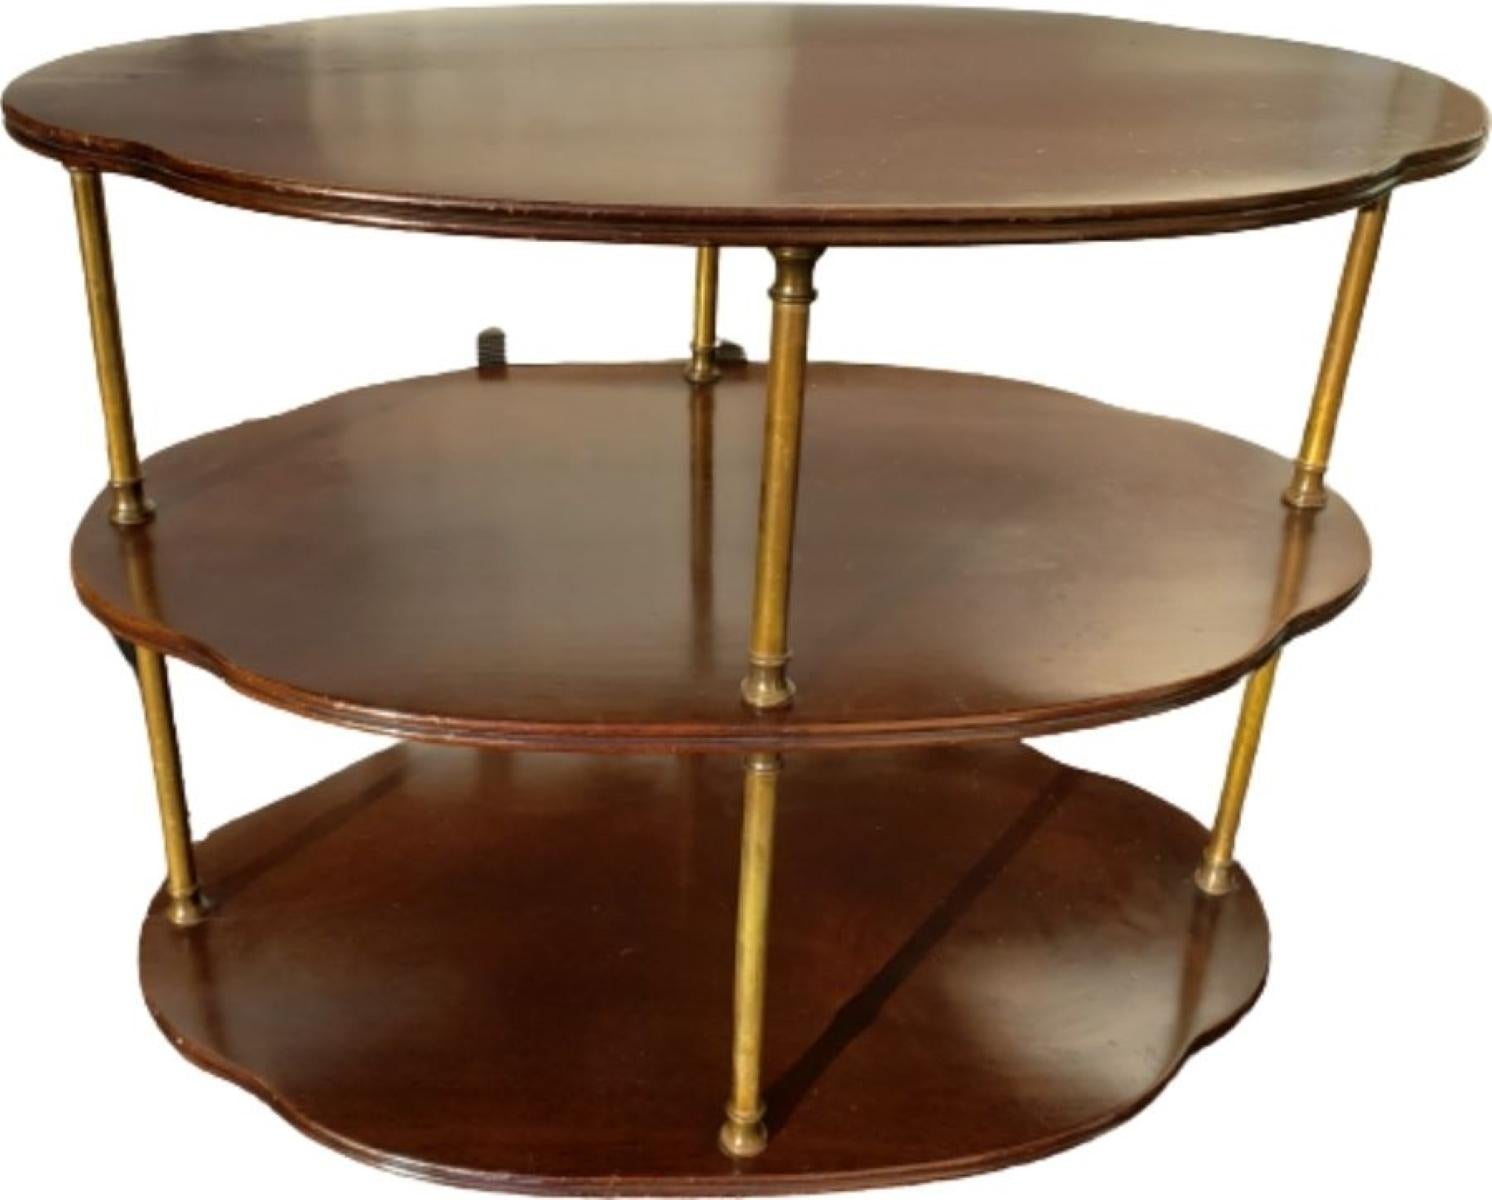 Hollywood Regency three tier Mahogany server with brass details and casters. This oval server on brass wheels is simple in design, yet very elegant. Brass columns and turnings on the sides. In great vintage condition with age-appropriate wear and